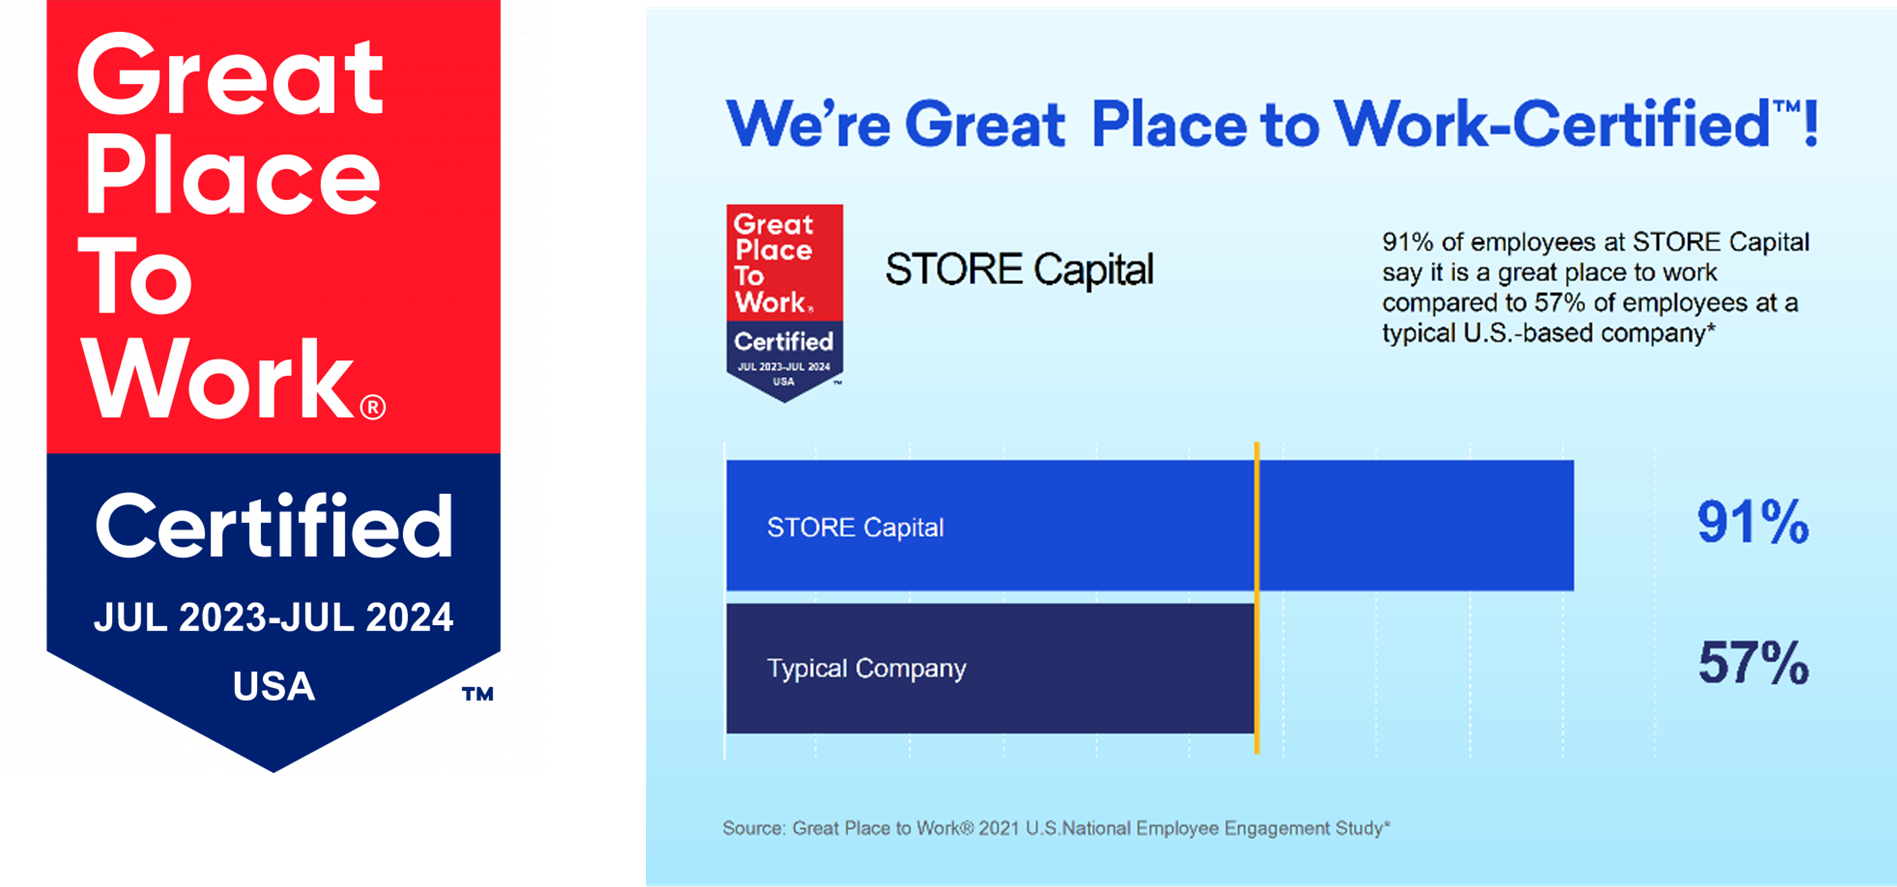 STORE CAPITAL CELEBRATES BEING A CERTIFIED *GREAT PLACE TO WORK* WORKPLACE FOR SECOND YEAR IN A ROW!